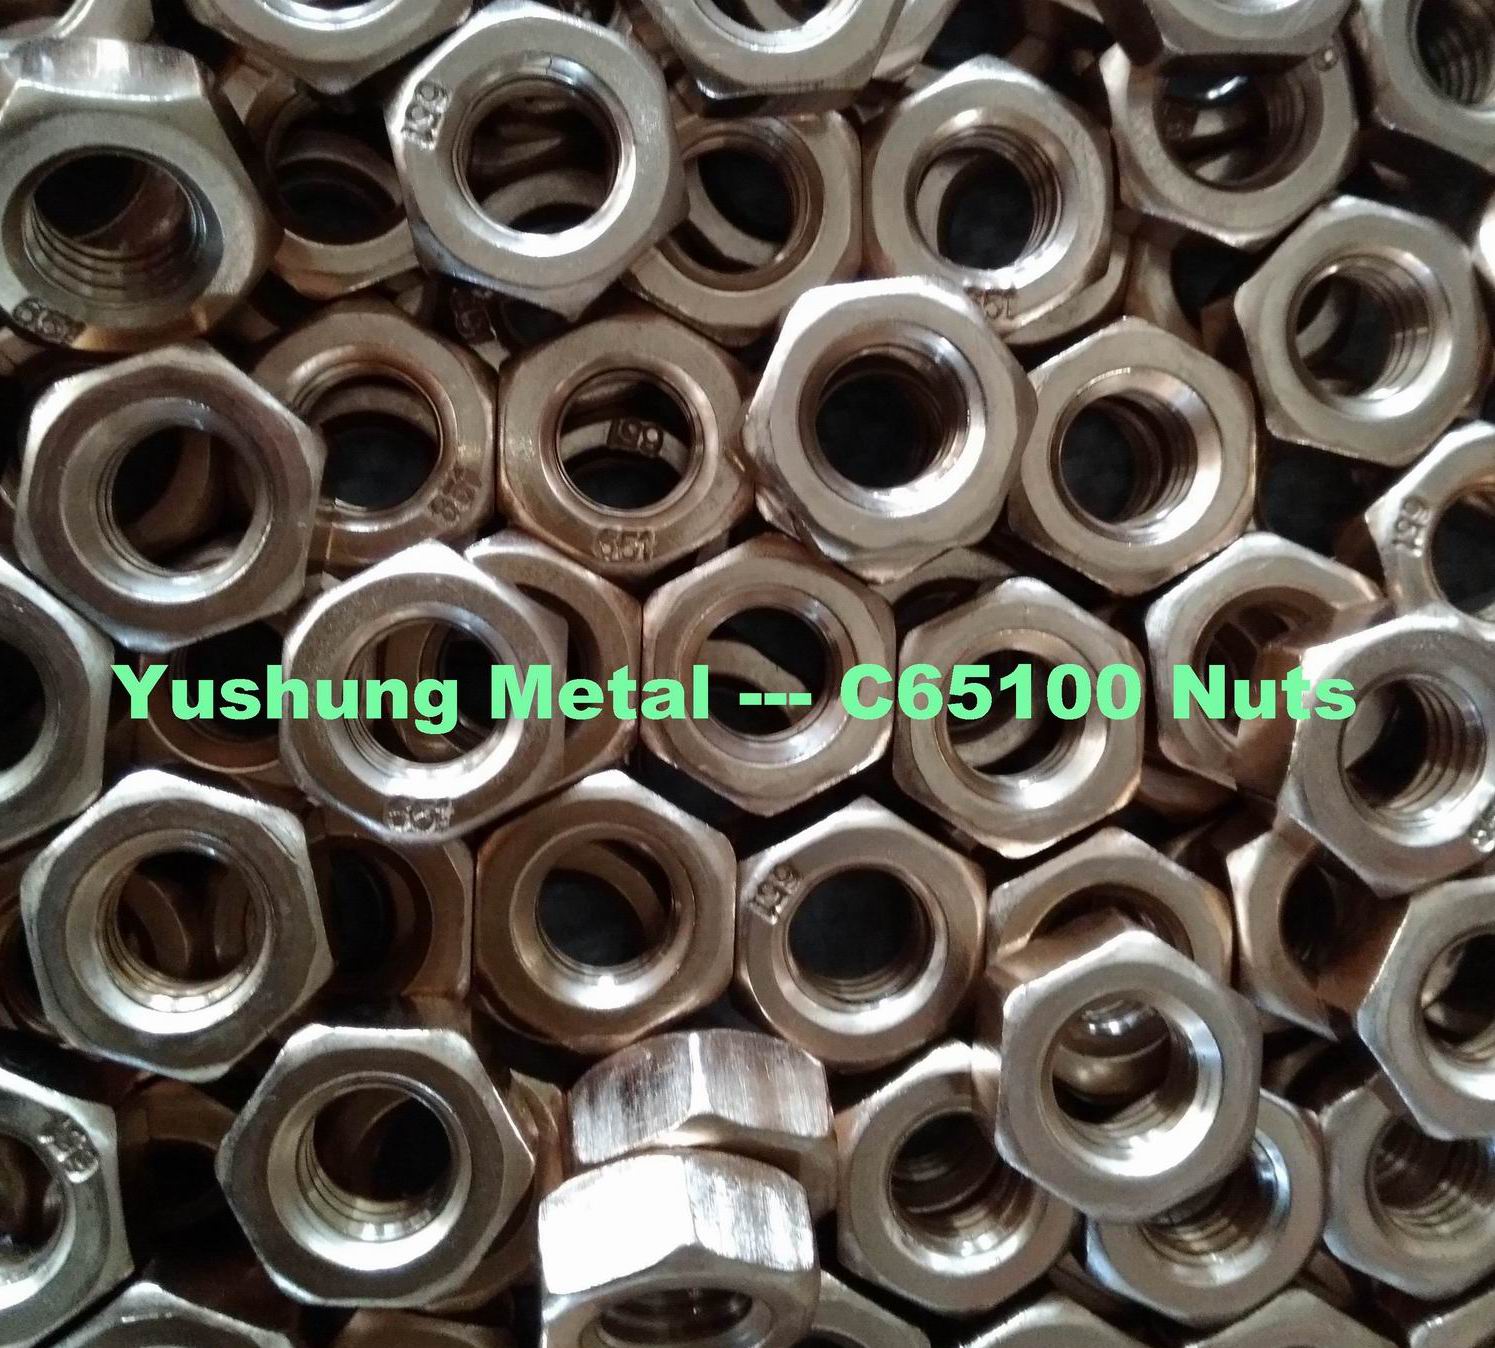 Silicon bronze finished hex nuts